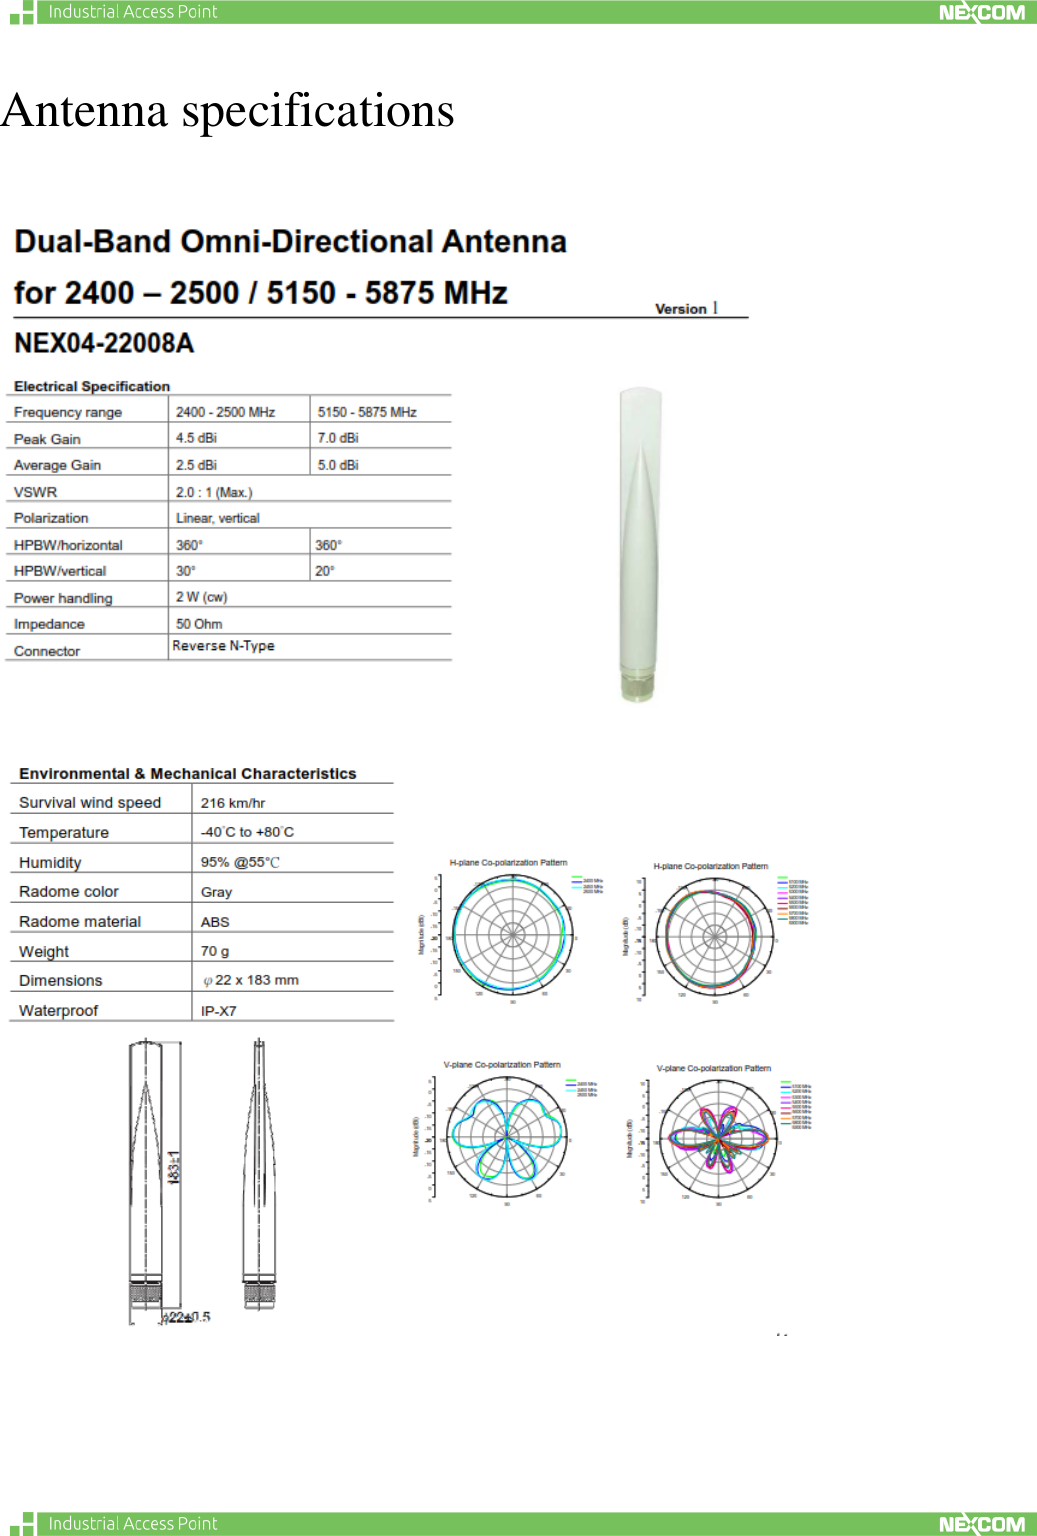   Antenna specifications        